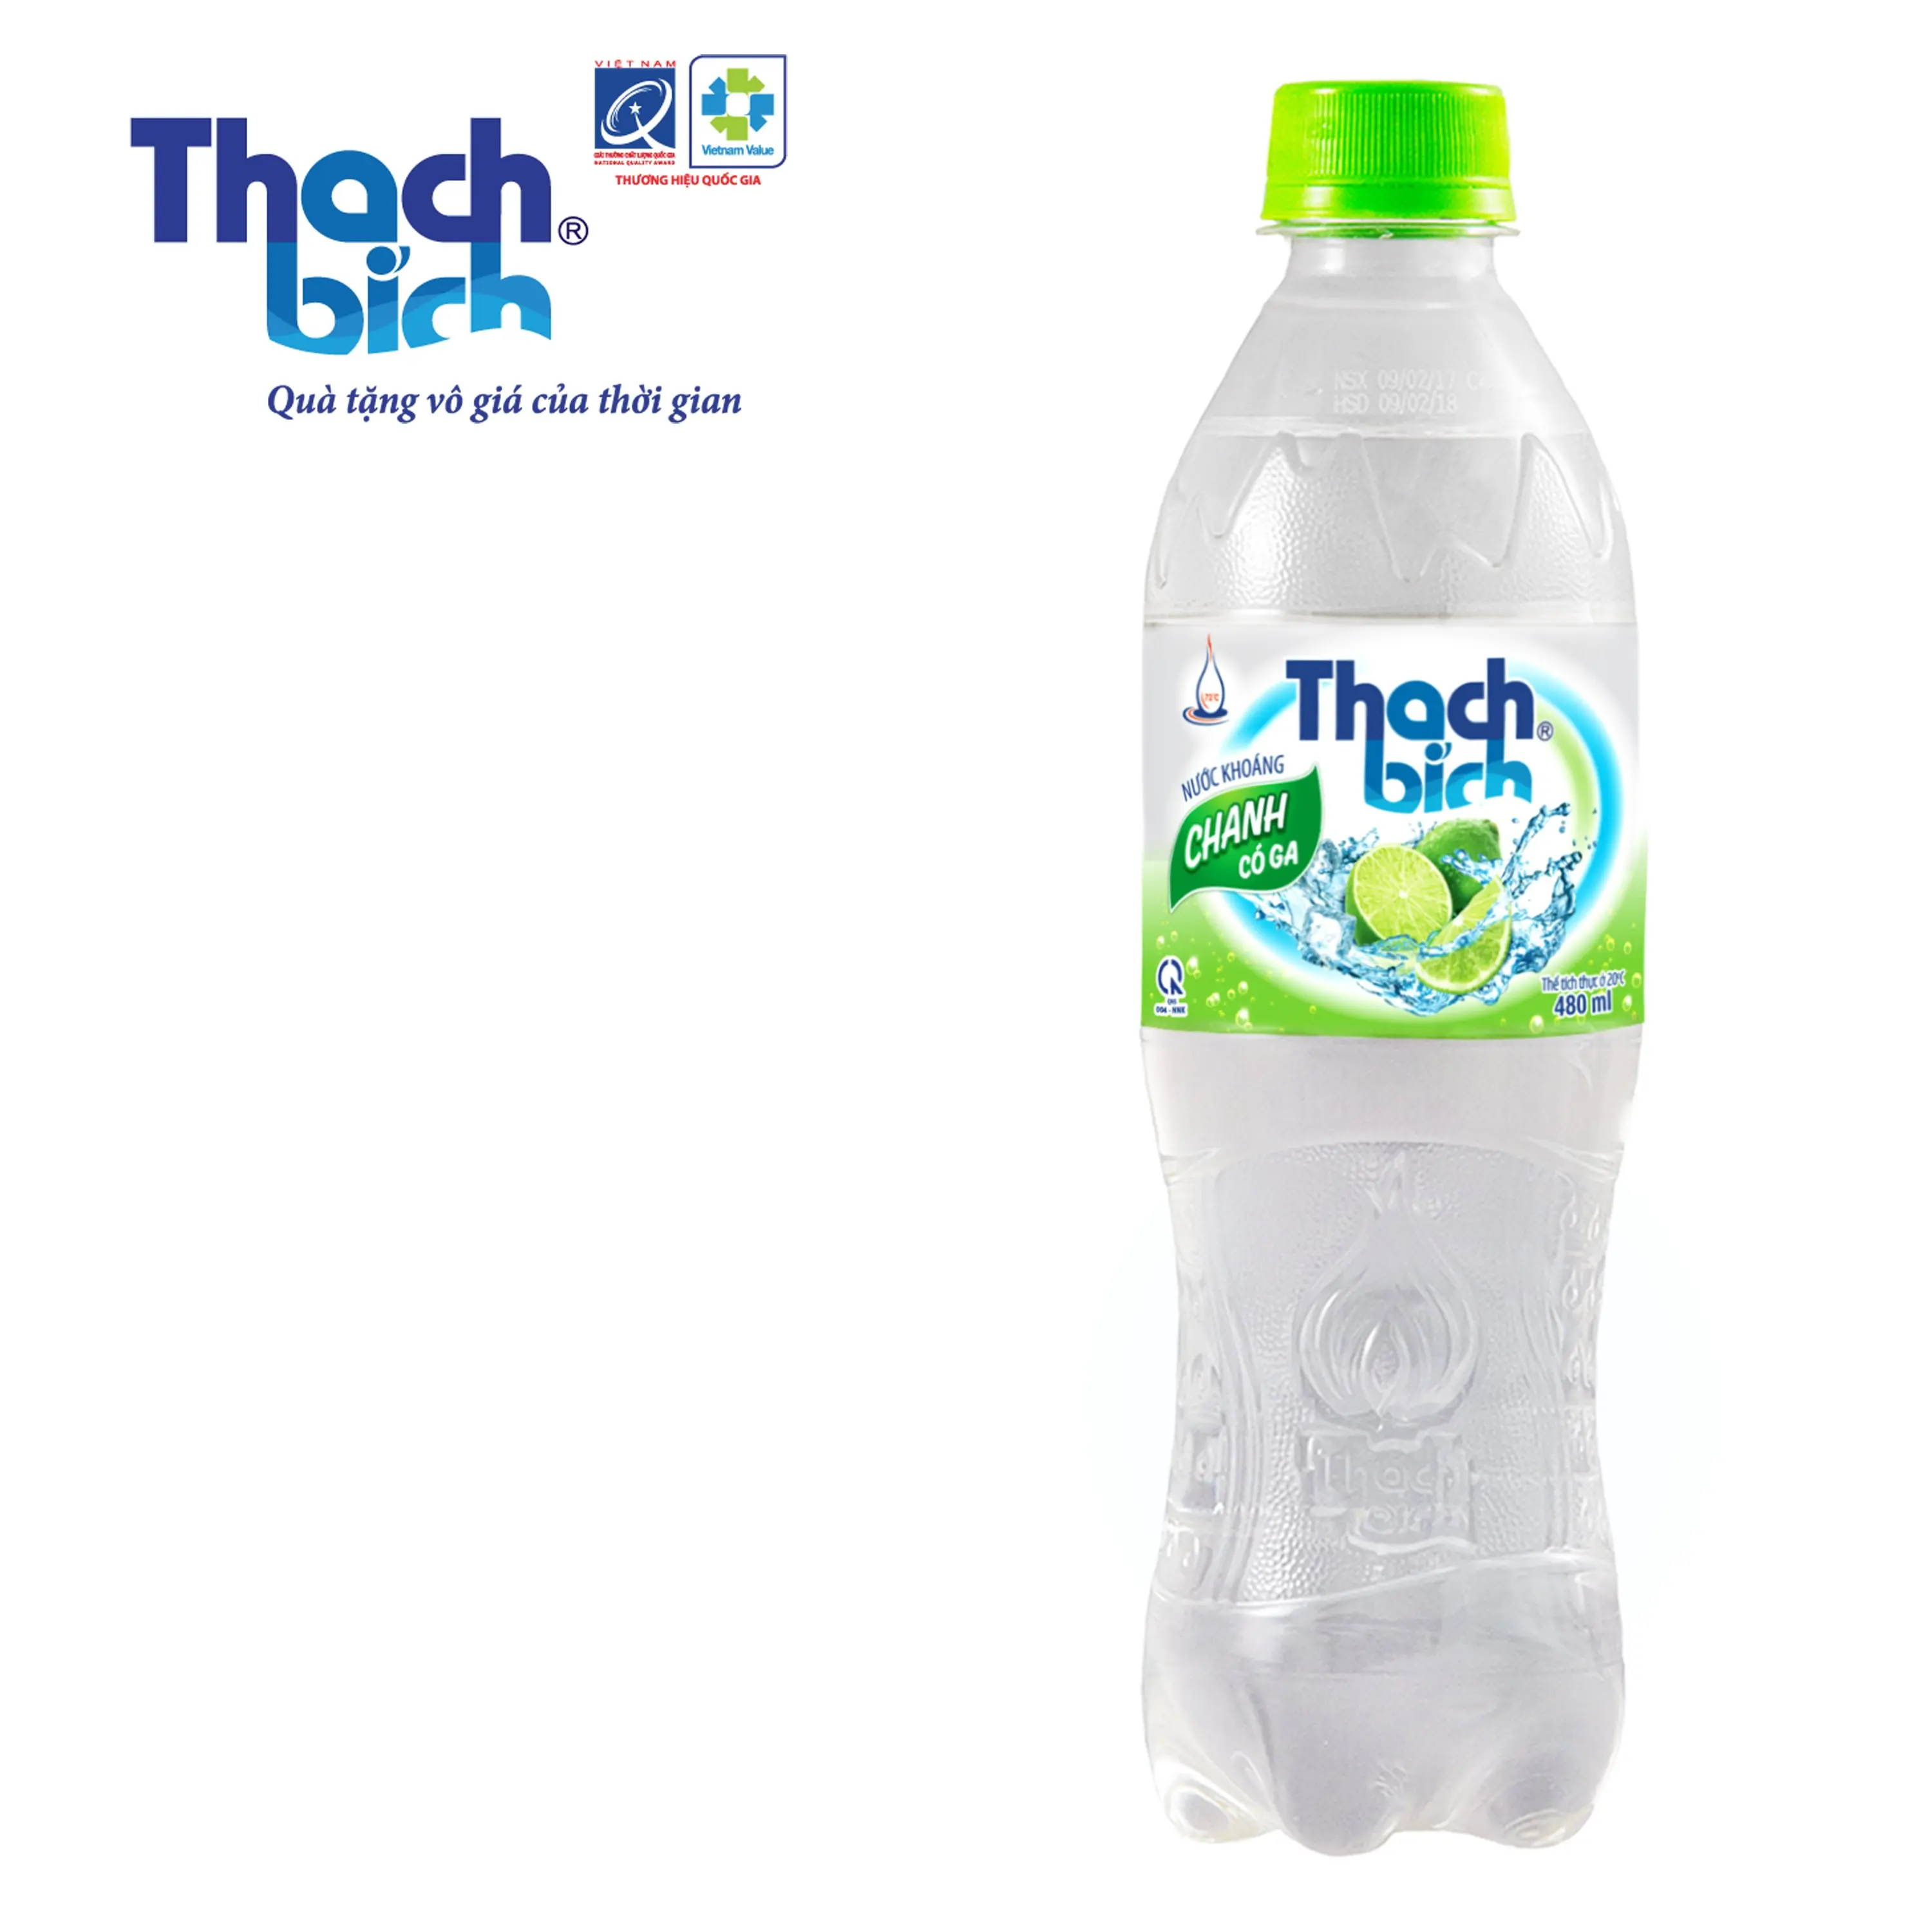 The best quality Natural Mineral Water in Vietnam